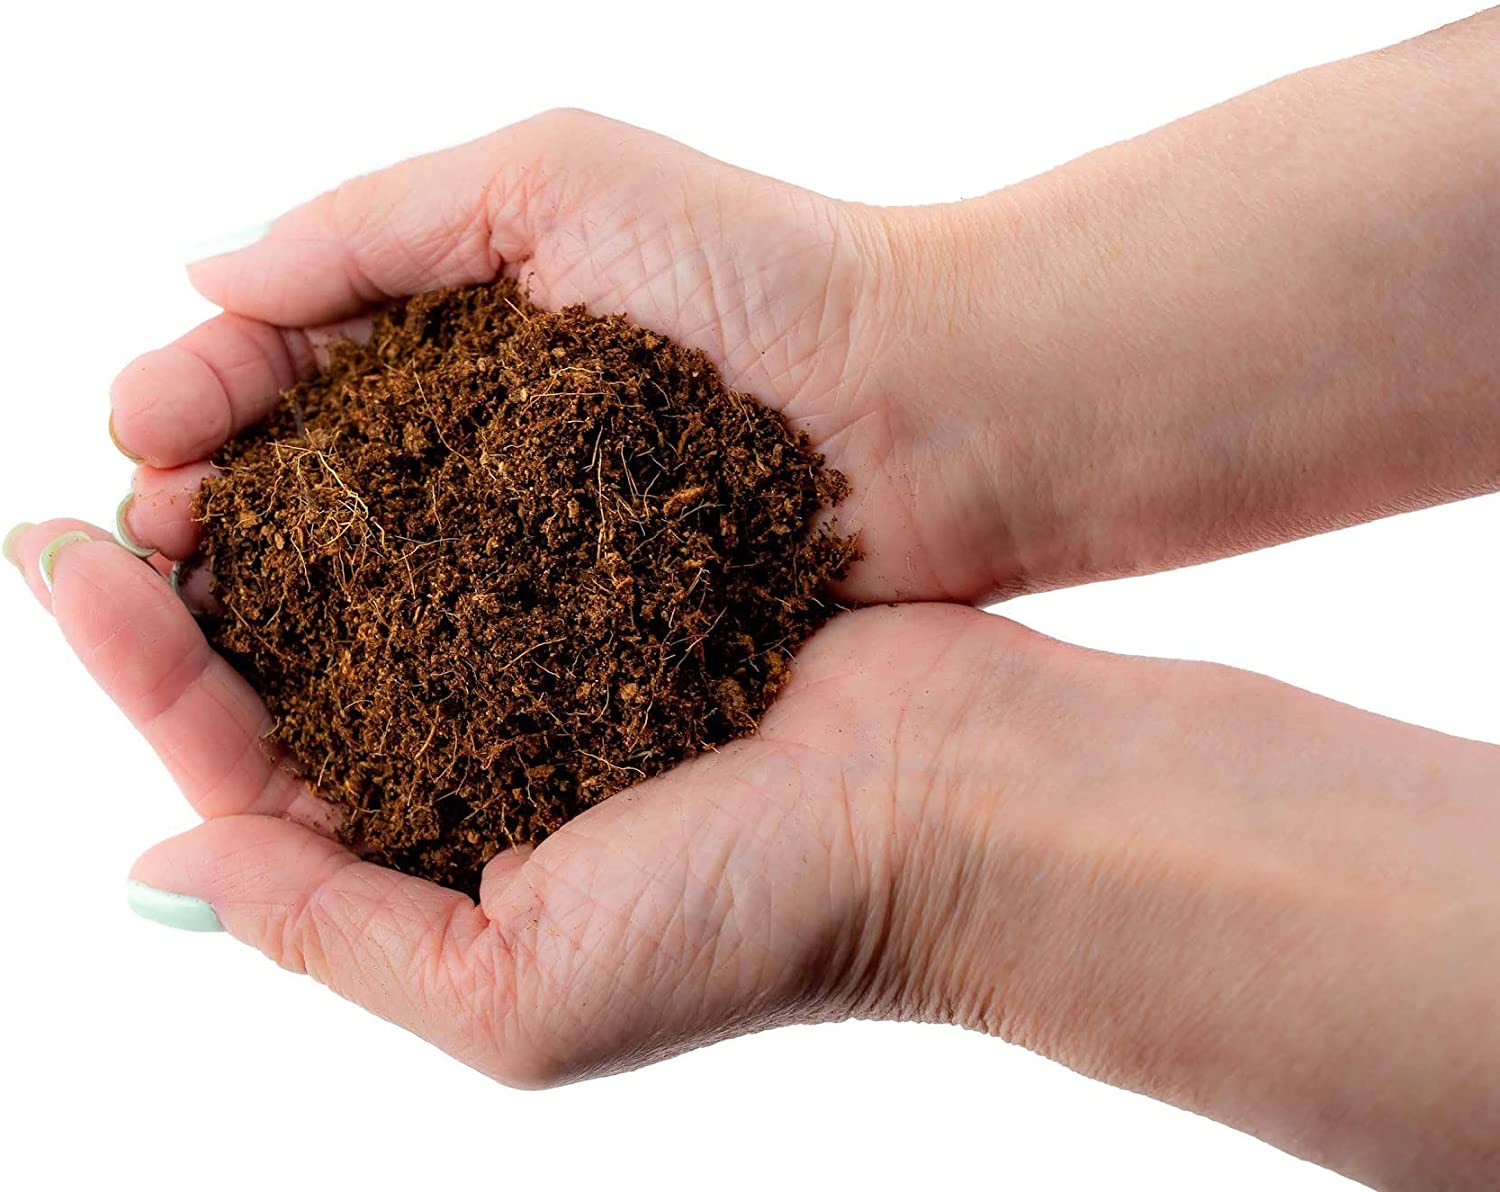 ⭐ PREMIUM Organic Coconut Coir Mix for Home Gardening - All Natural Soil Amendment - PH Balanced and Double Washed Coco Coir by ://N ★ LOVA - 1 Quart Bag - image 3 of 4